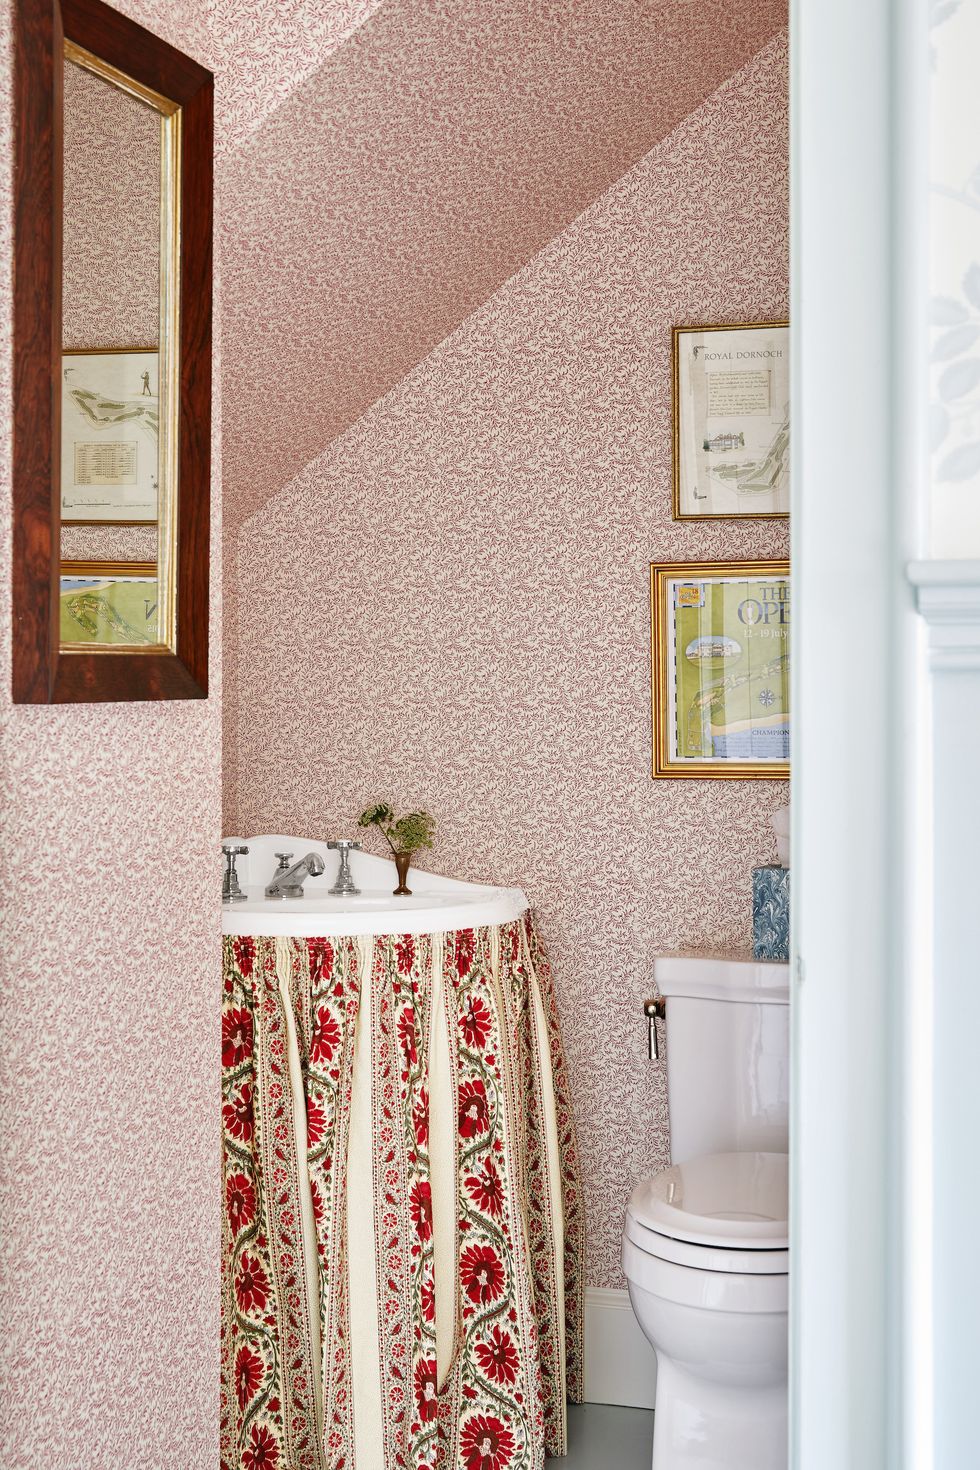 8 Bed and Breakfast Guest Bathroom Essentials